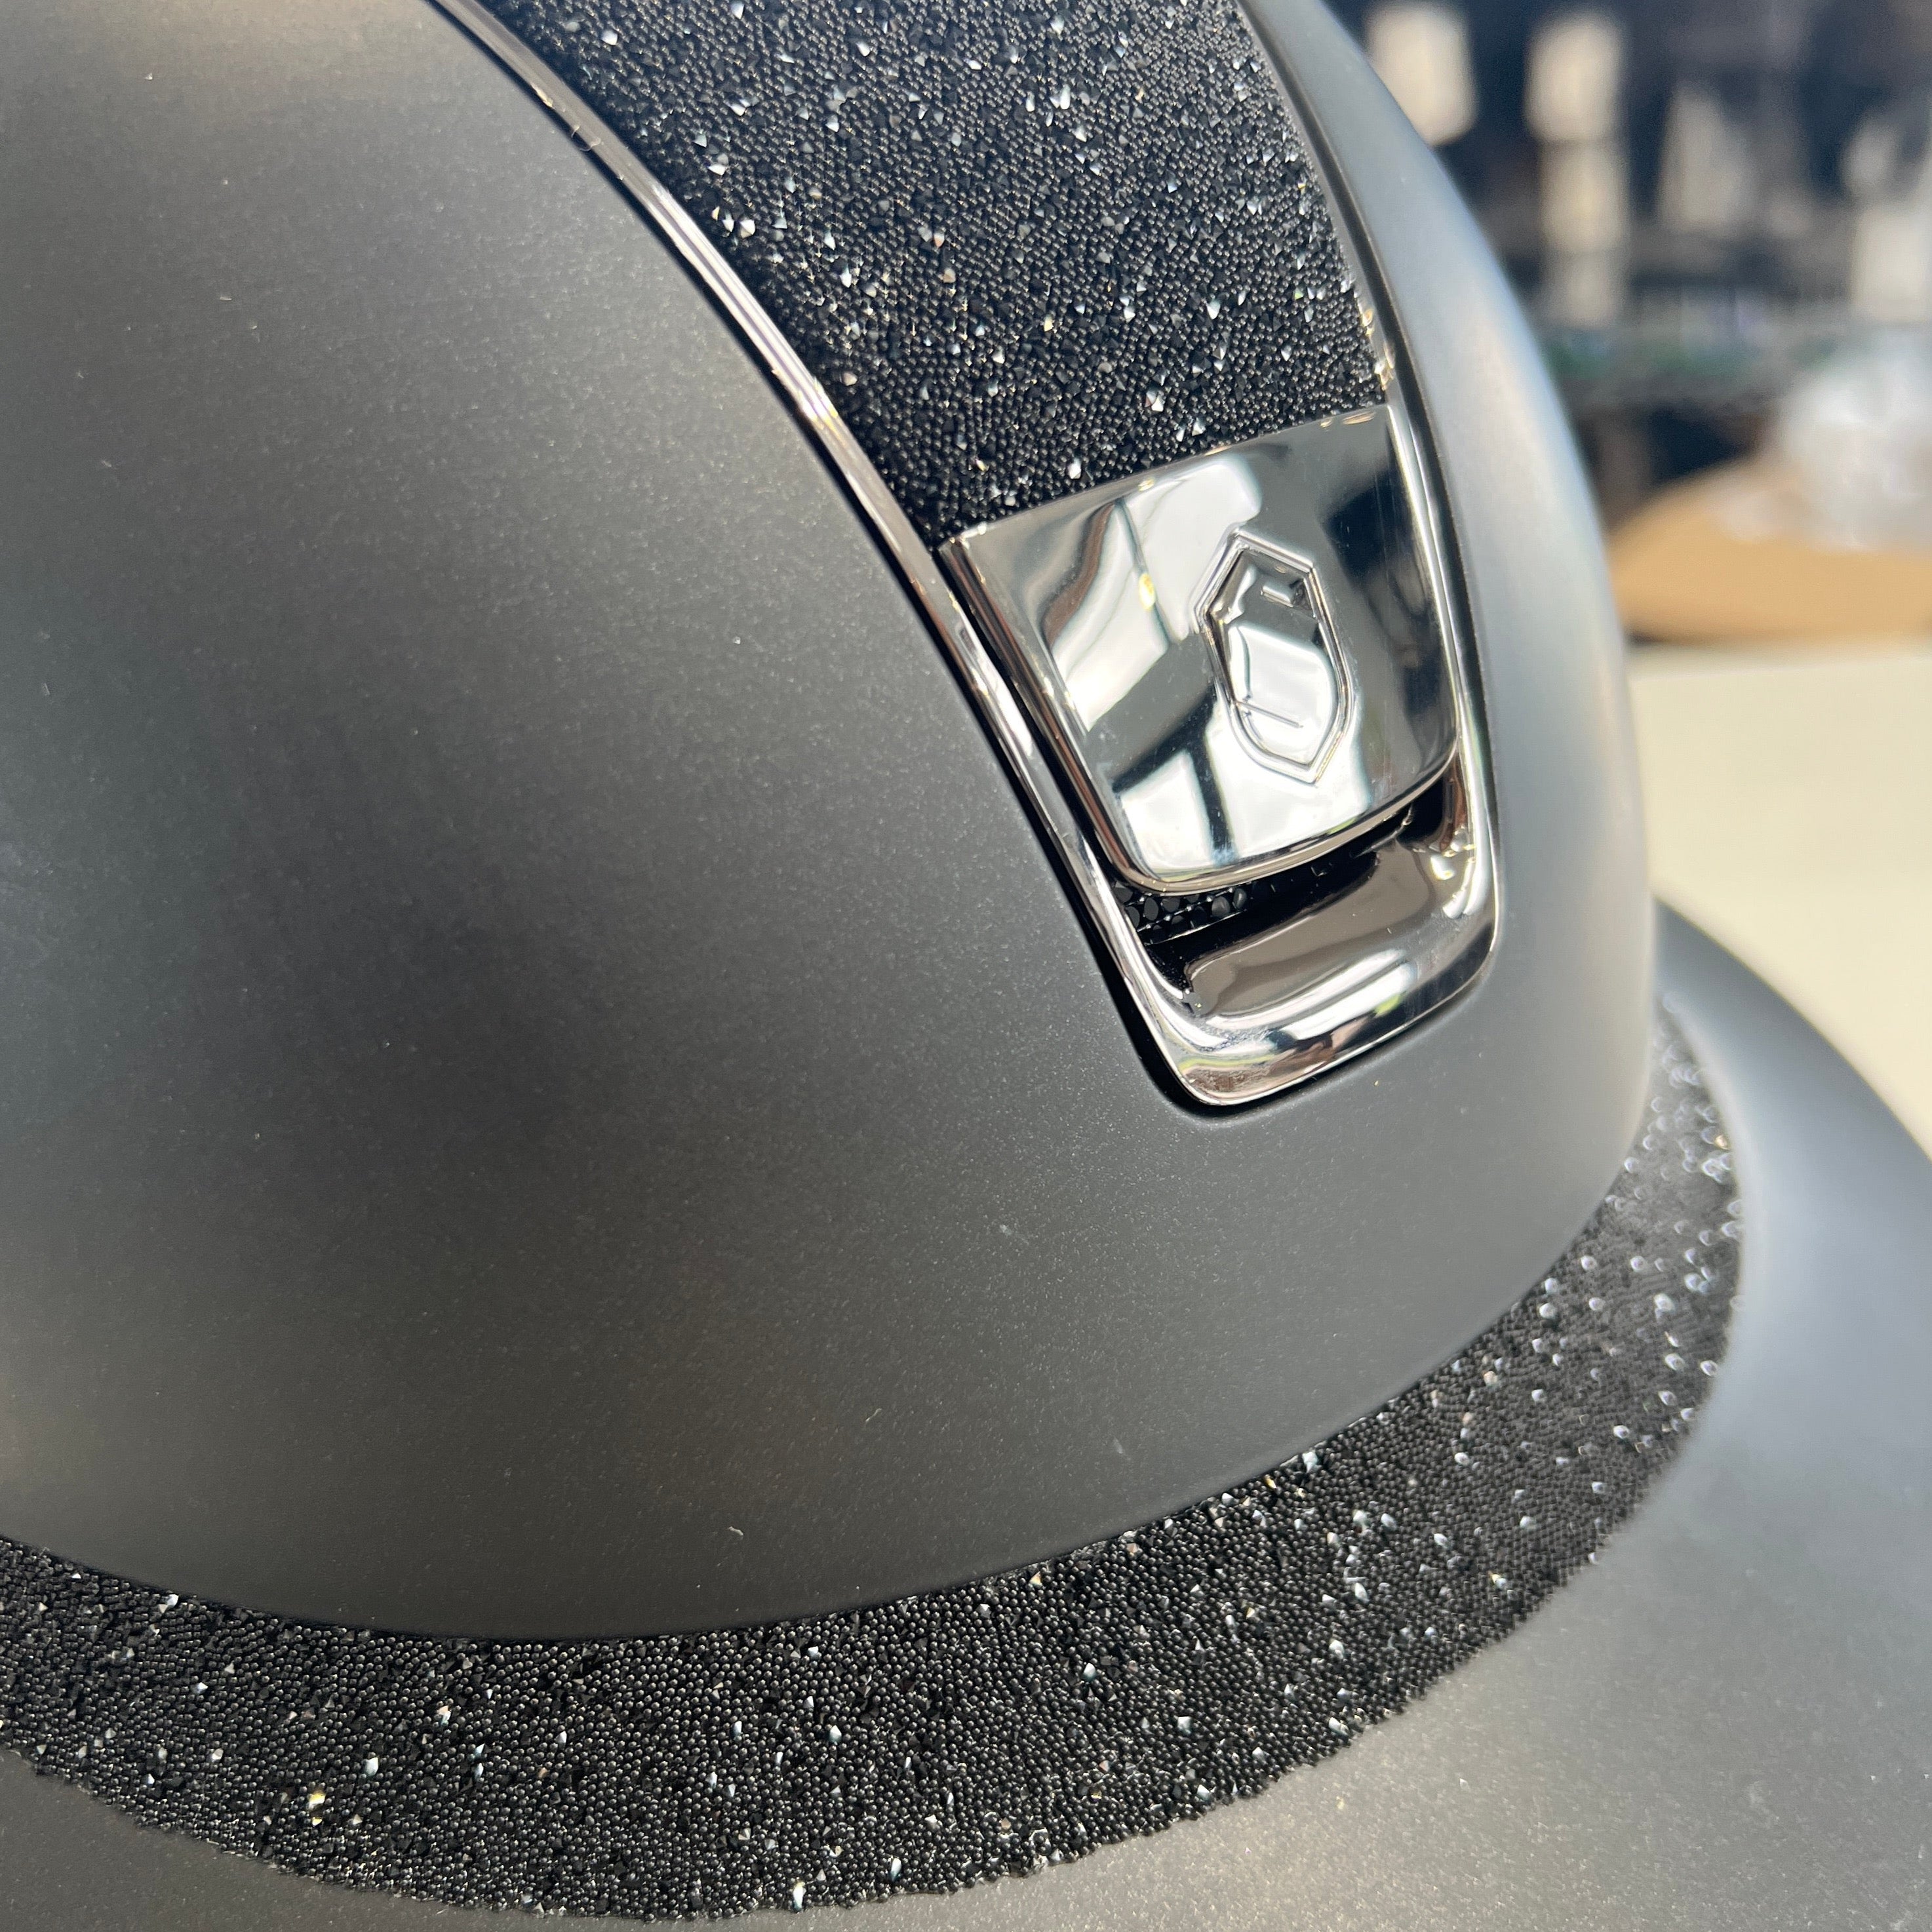 Samshield MissShield 1.0 Black Crystal and Frontal Trim - in stock and ready to ship!